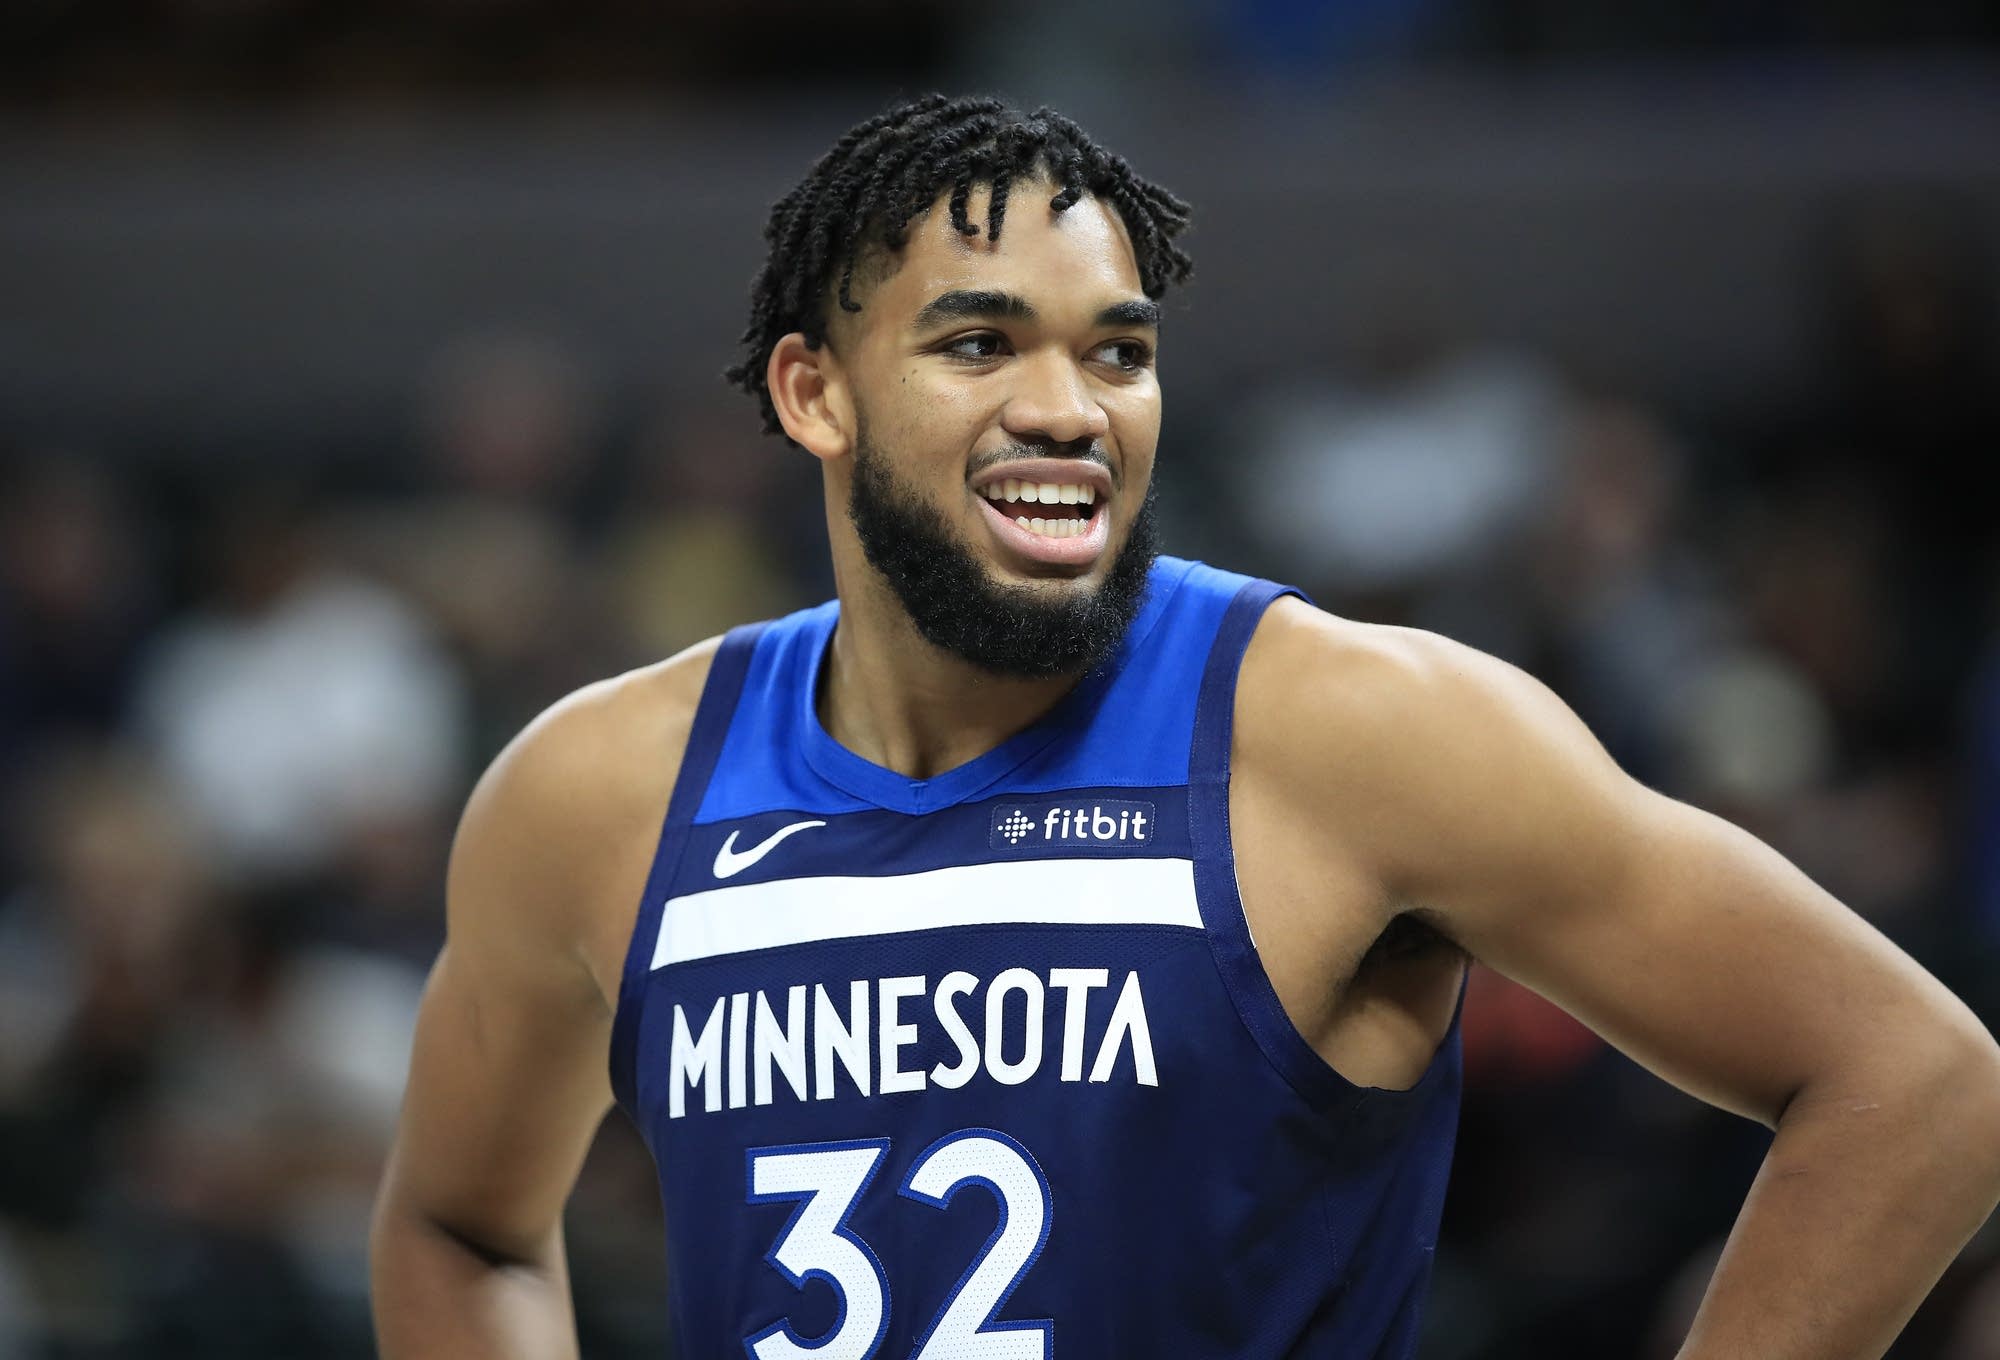 Karl-Anthony Towns of the Wolves